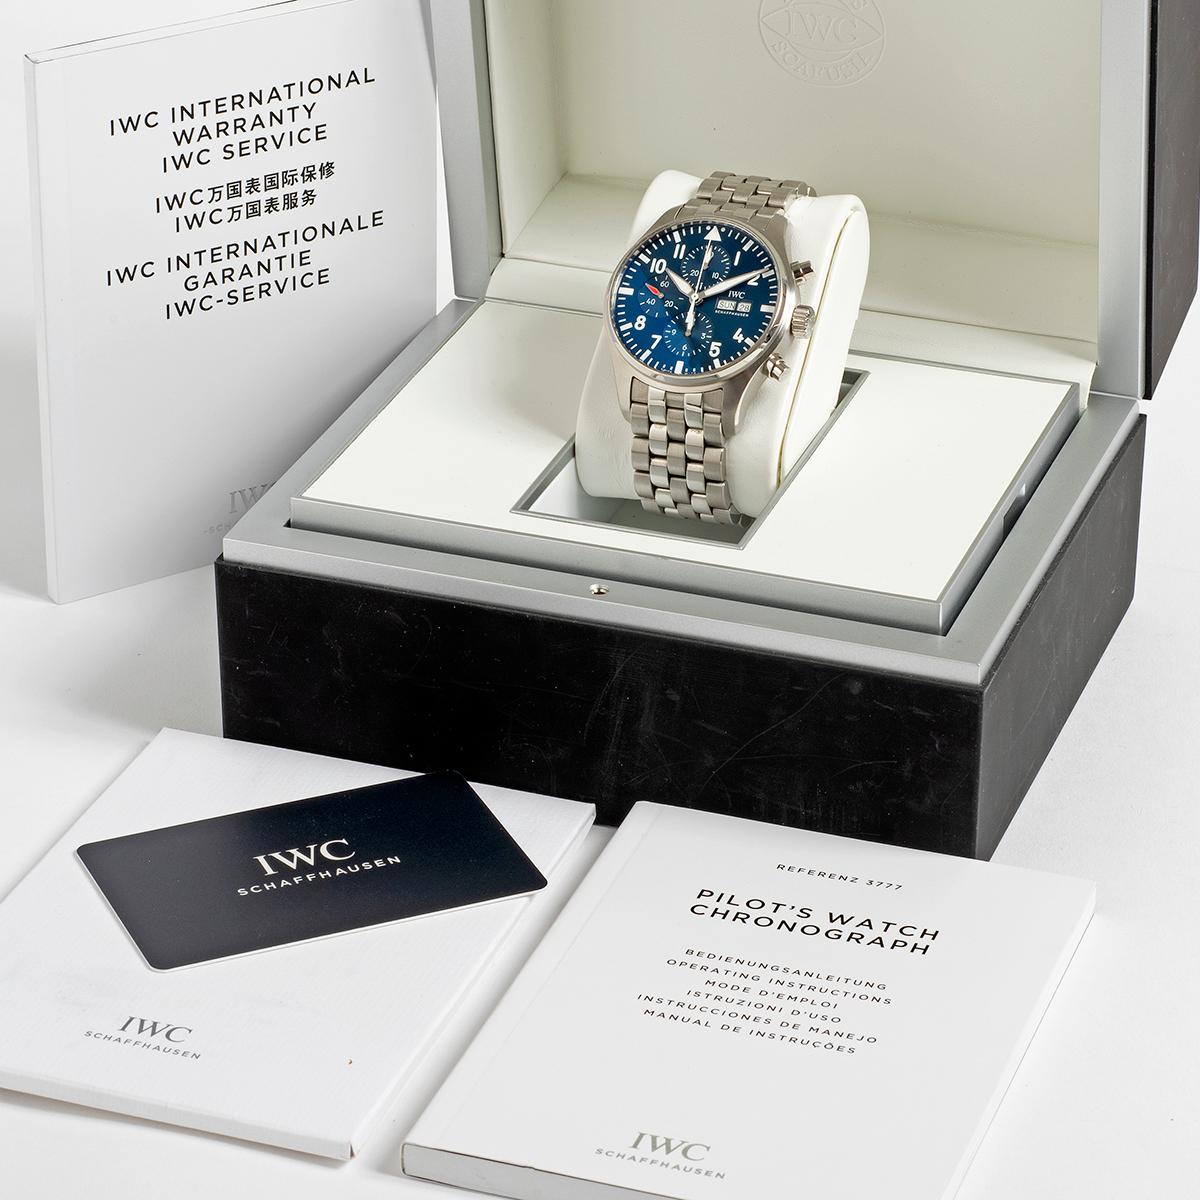 Our IWC Pilot Chronograph Le Petit Prince , reference IW377717 , features the classic combination of stainless steel 43mm case with very attractive blue dial and the rarer specified stainless steel bracelet. Presented in outstanding condition with